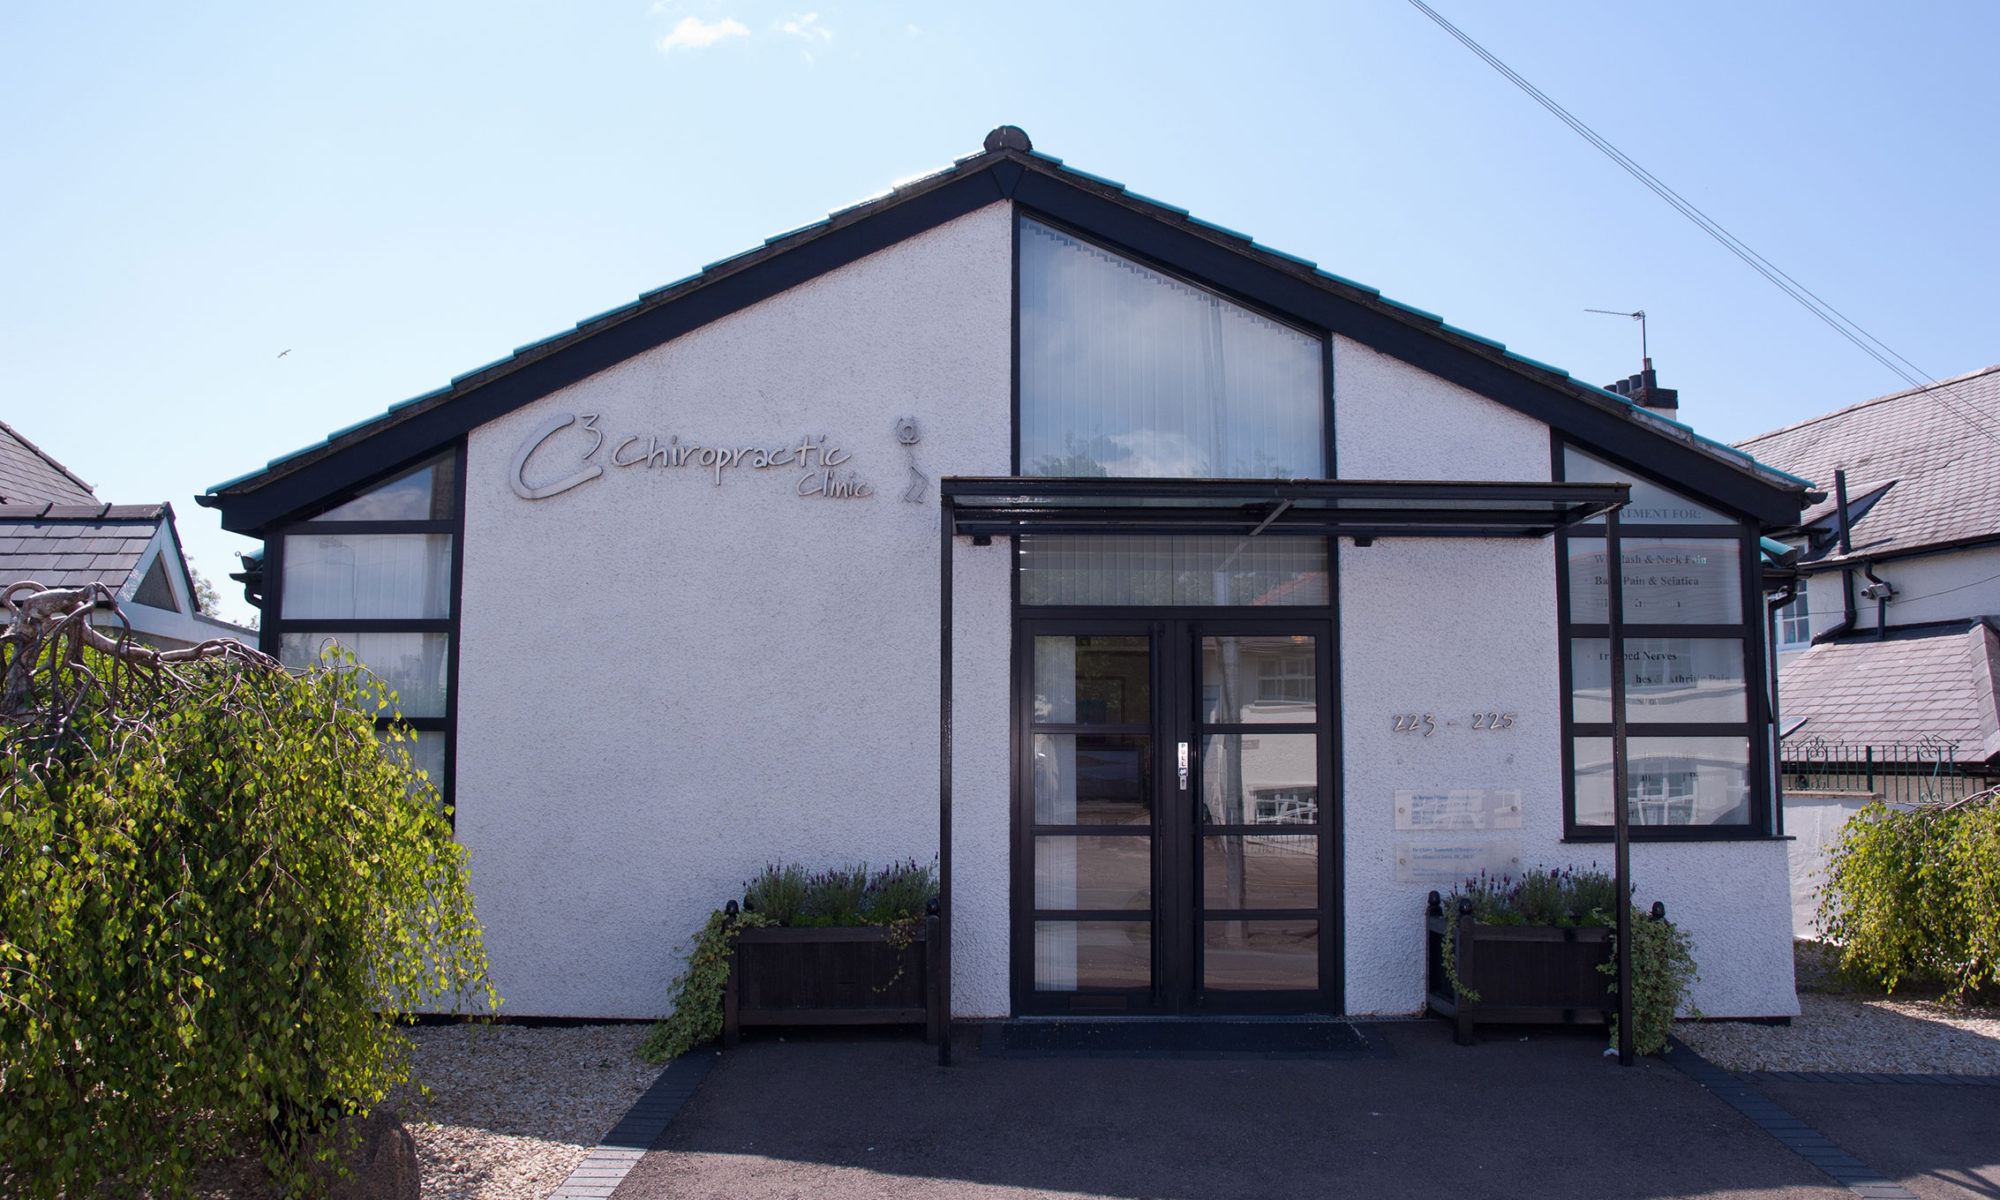 C3 Chiropractic Clinic in Cardiff